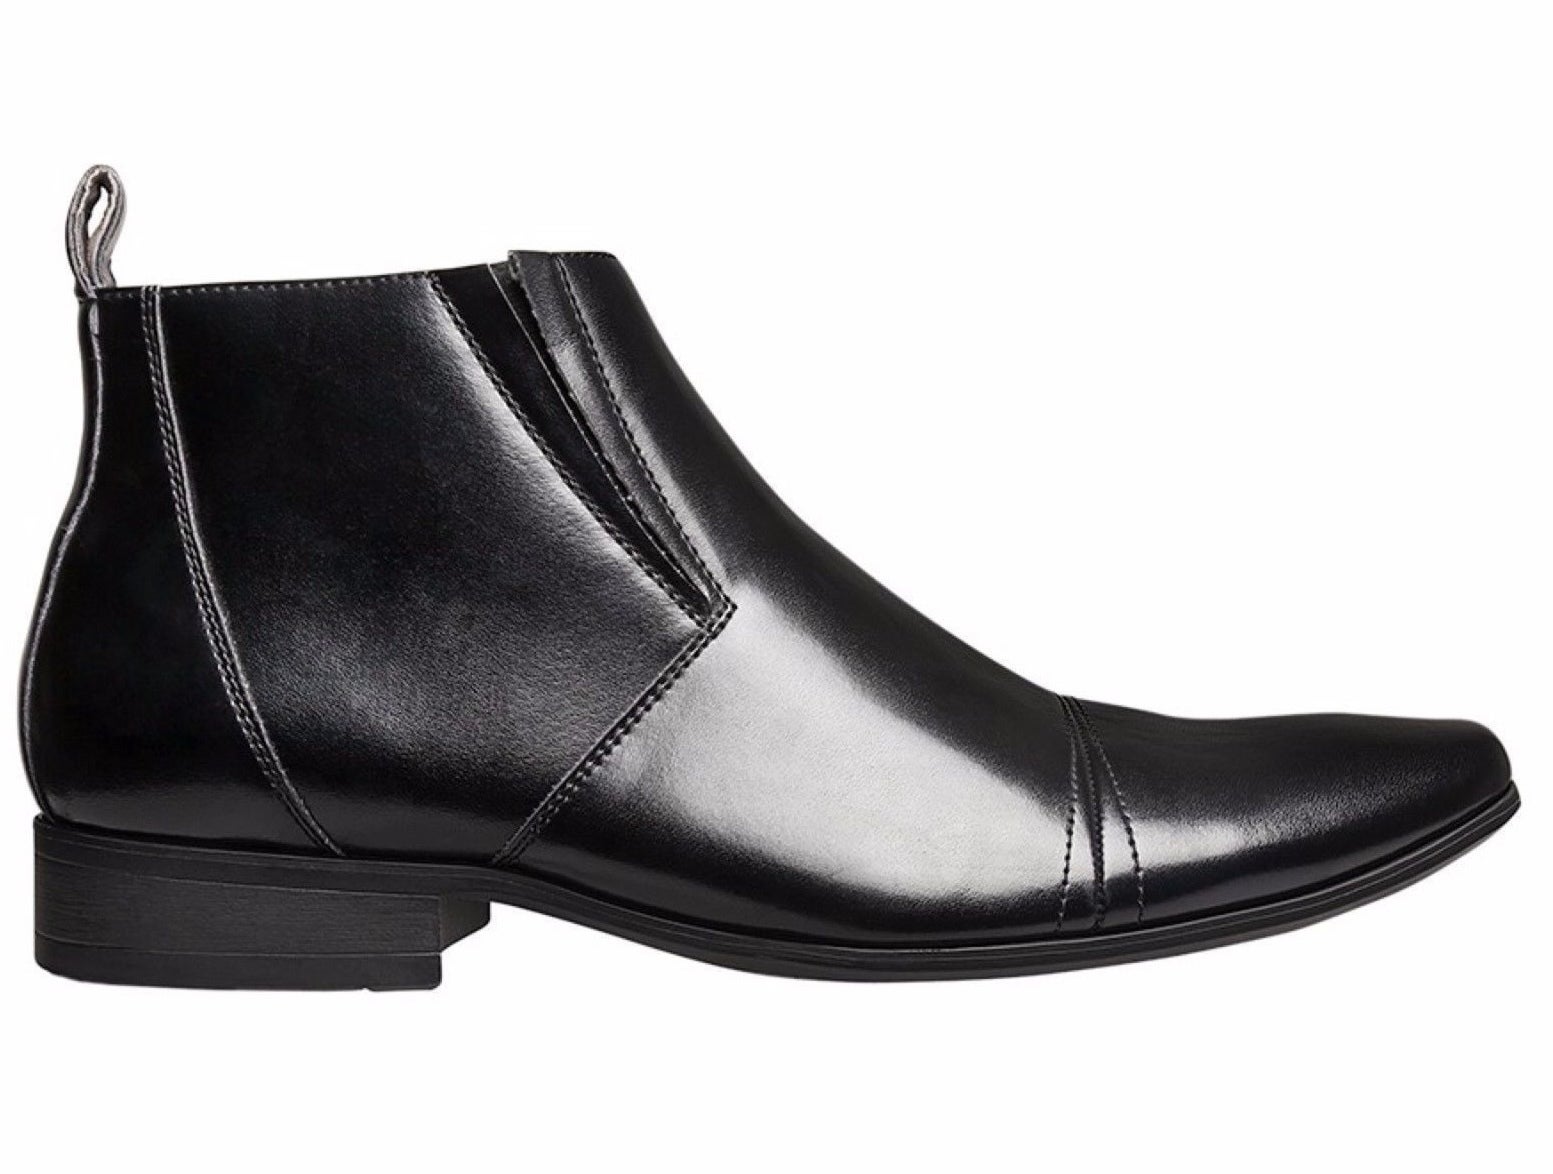 JULIUS MARLOW JM33 Cain Synthetic Leather Boots Shoes Slip On Men's Formal Work